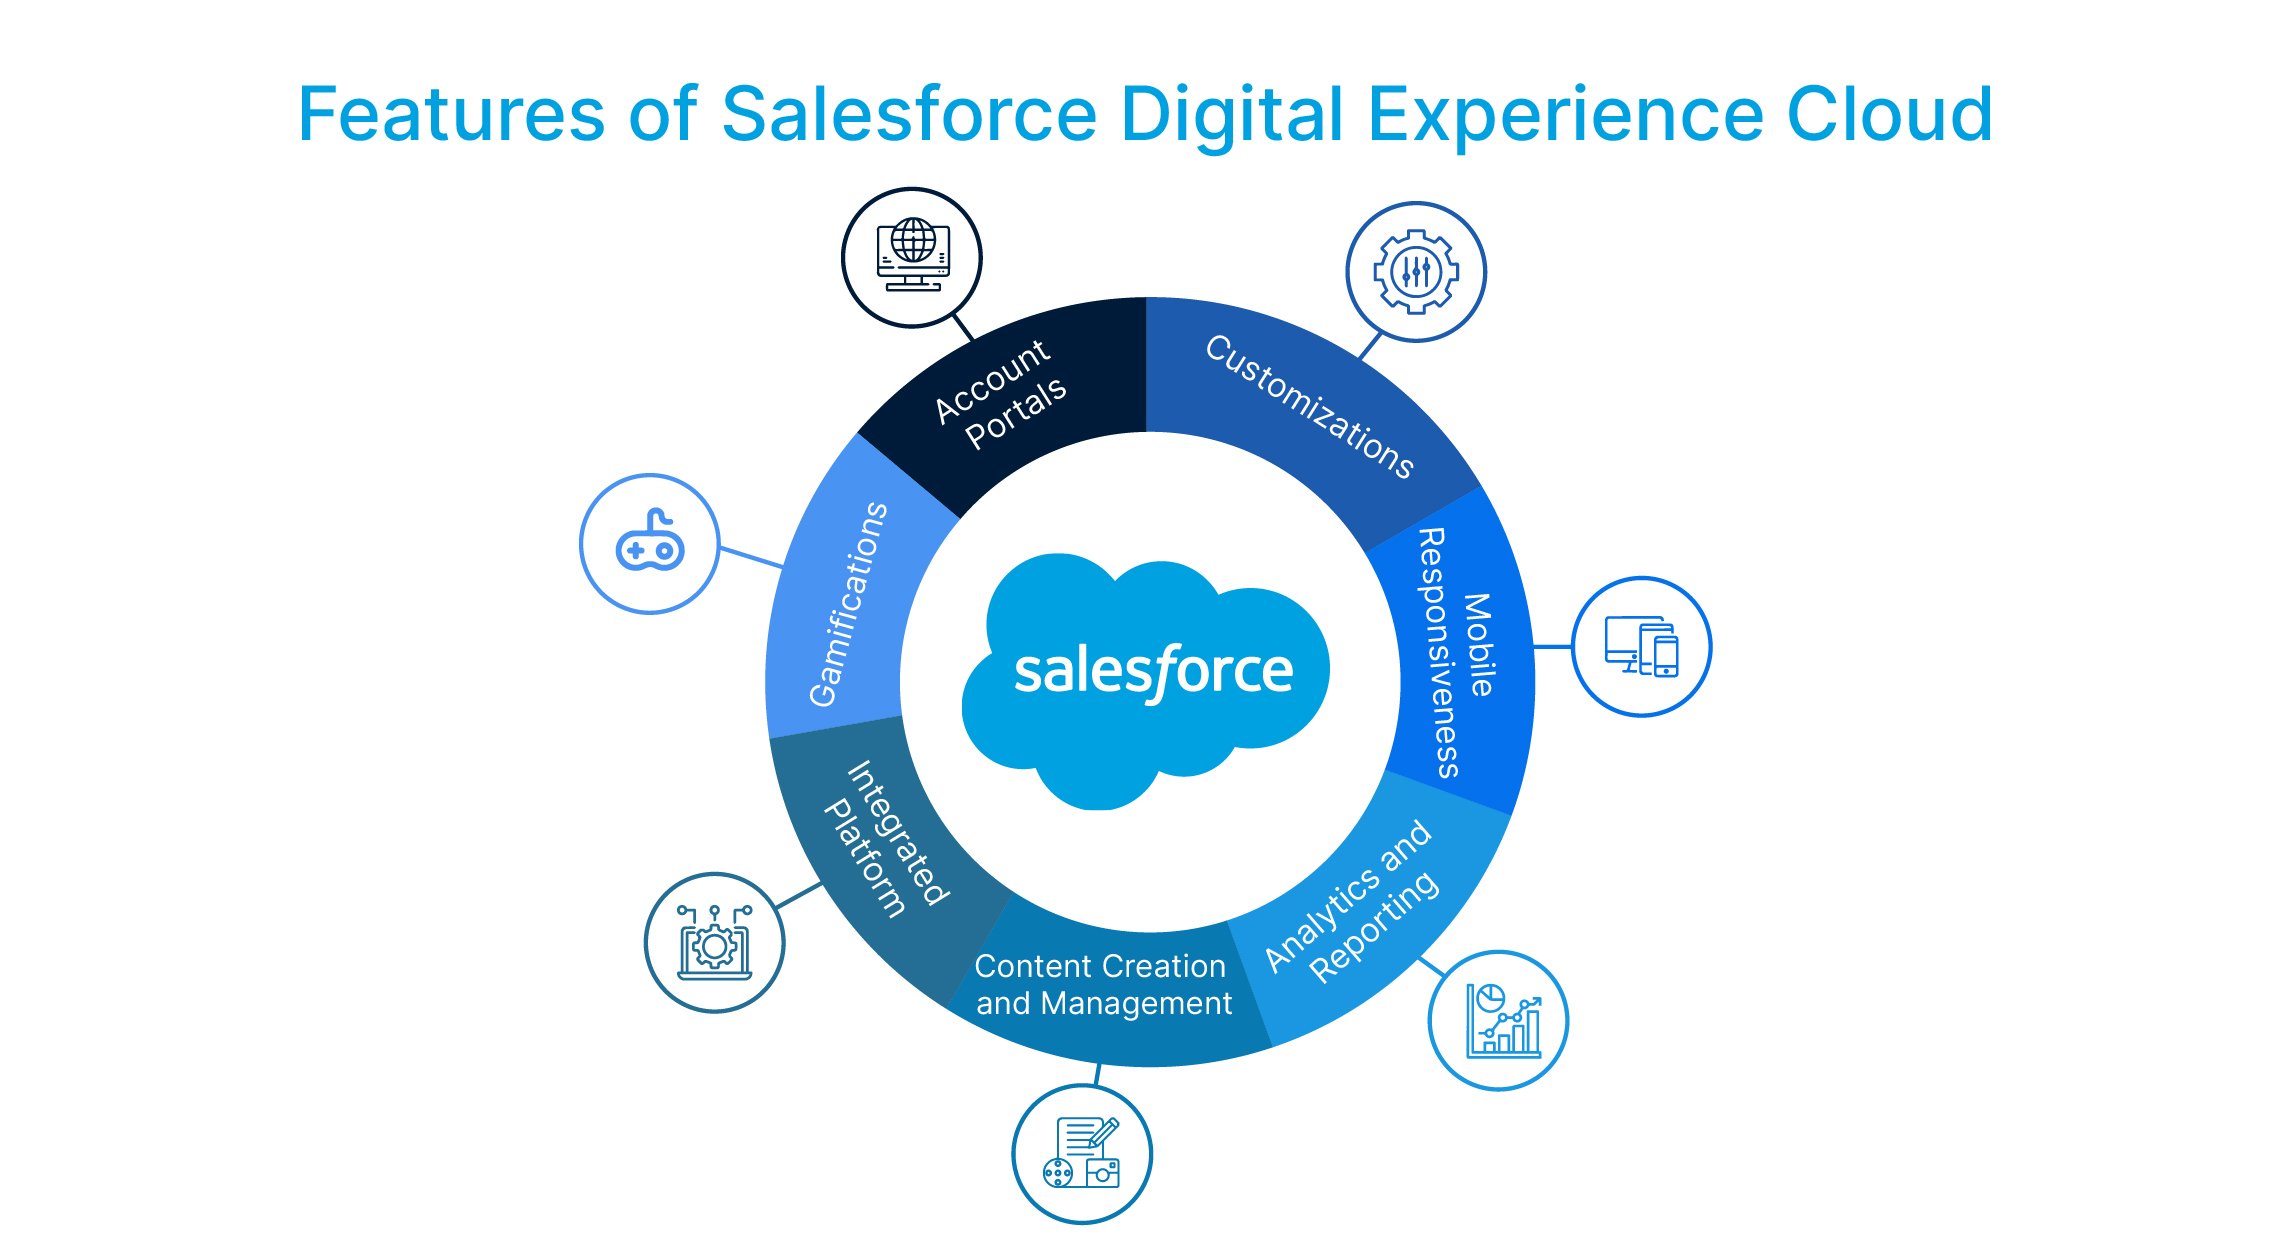 Features of Salesforce Digital Experience Cloud